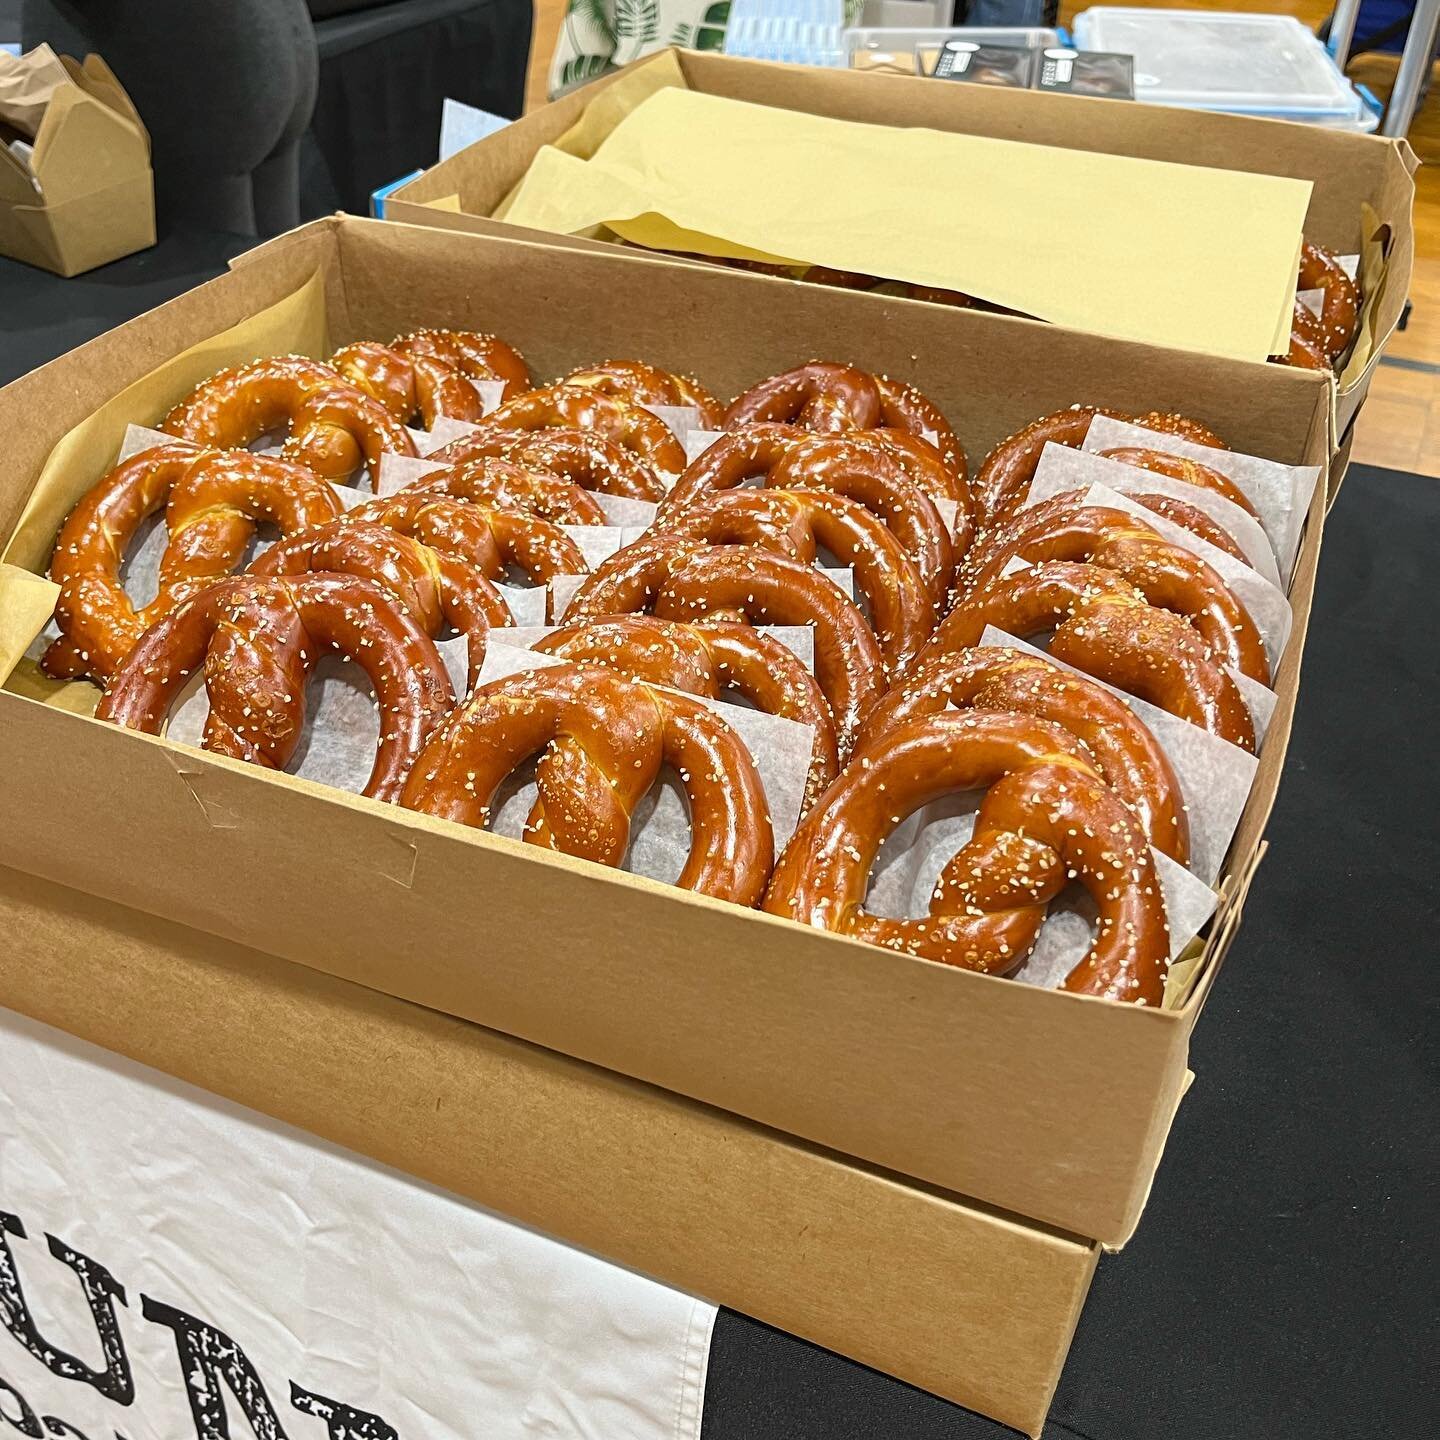 Oh my&hellip;. Look who will be joining us this Sunday for Mother&rsquo;s Day!! @navadbakers (formerly Buns) 

If you haven&rsquo;t tried the bABKA or the pretzels or the challah breads you haven&rsquo;t lived&hellip;. Lol.

Slide on over THIS Sunday